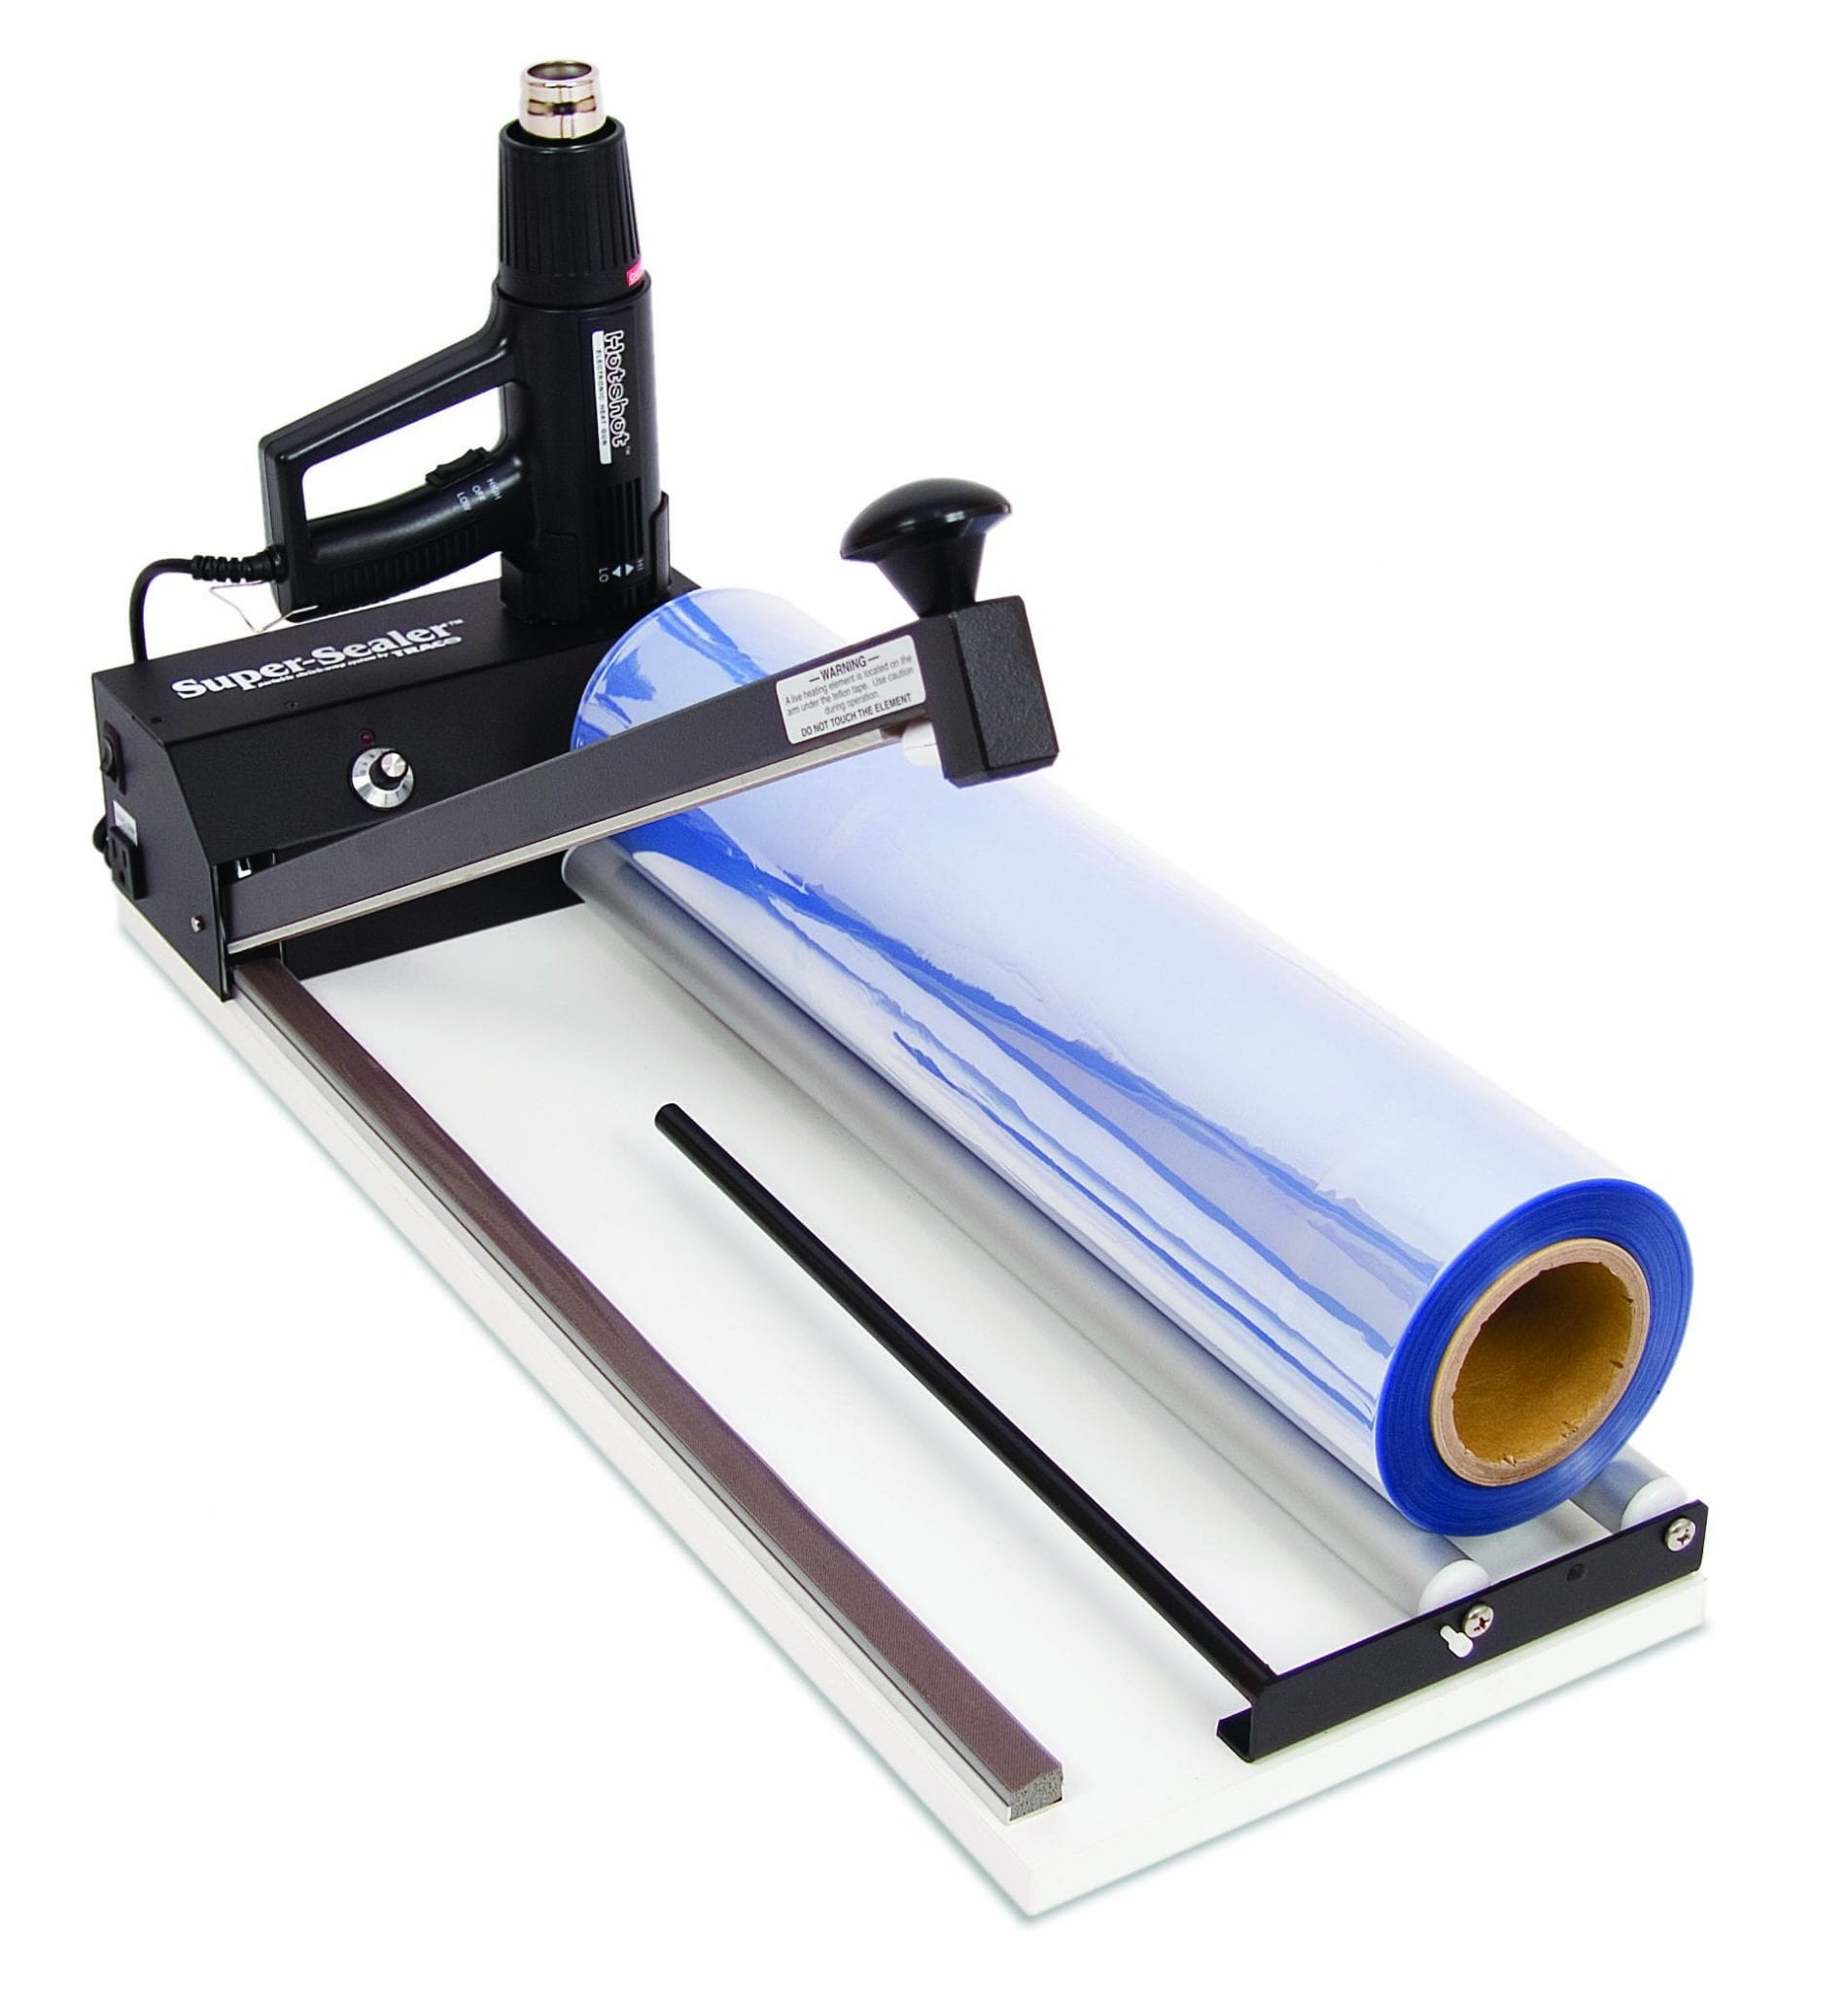 Industrial Heat Sealers, Compare Models